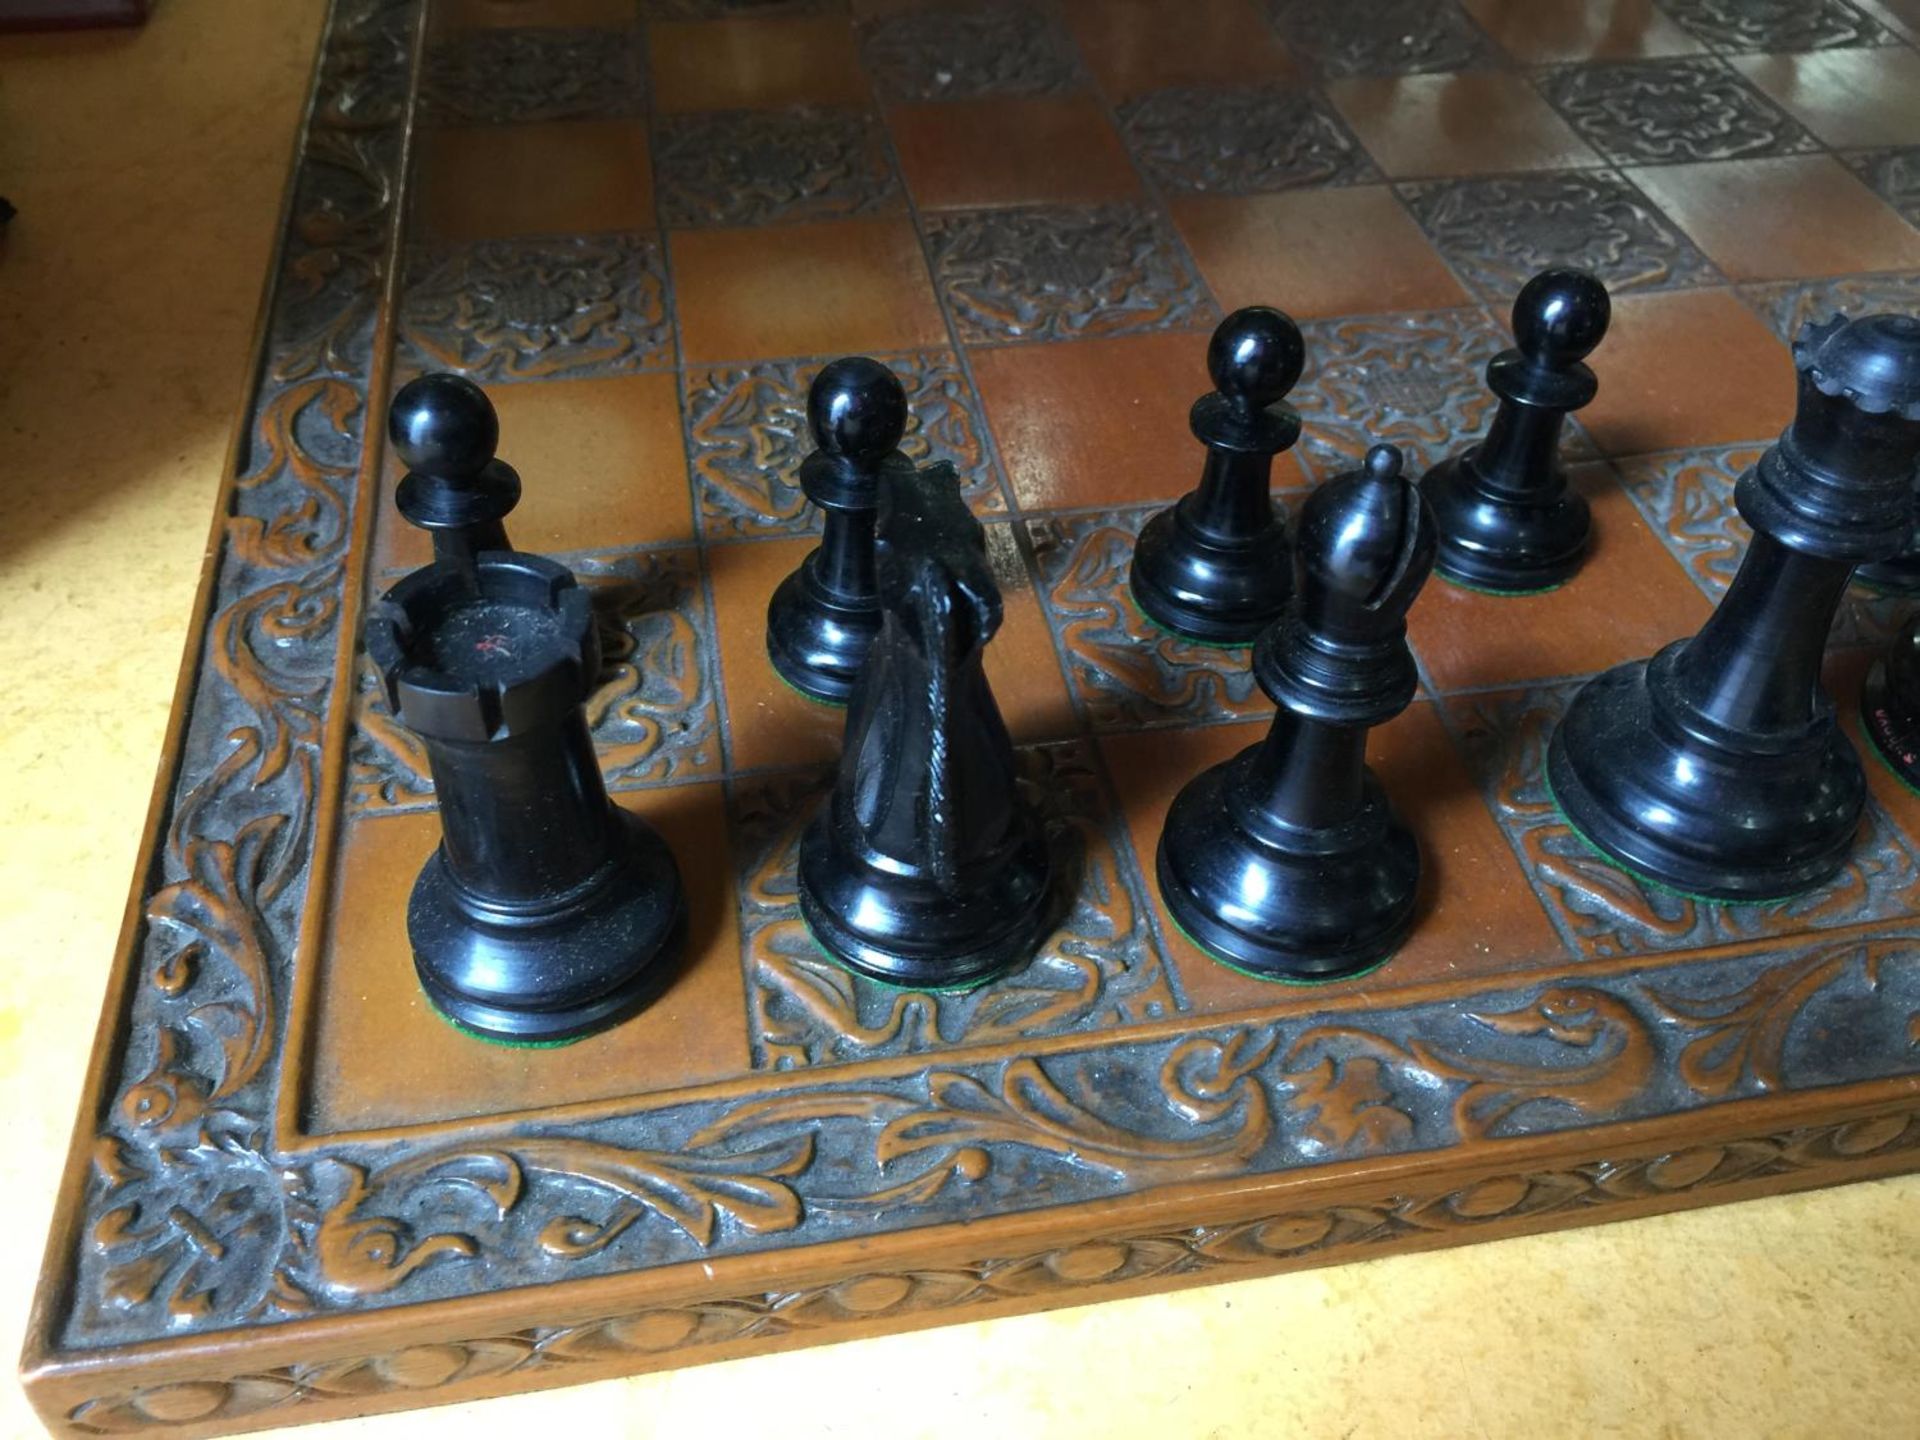 A WOODEN CARVED CHESSBOARD COMPLETE WITH THE PIECES PLUS DRAUGHTS AND A VINTAGE JIGSAW - Image 2 of 4